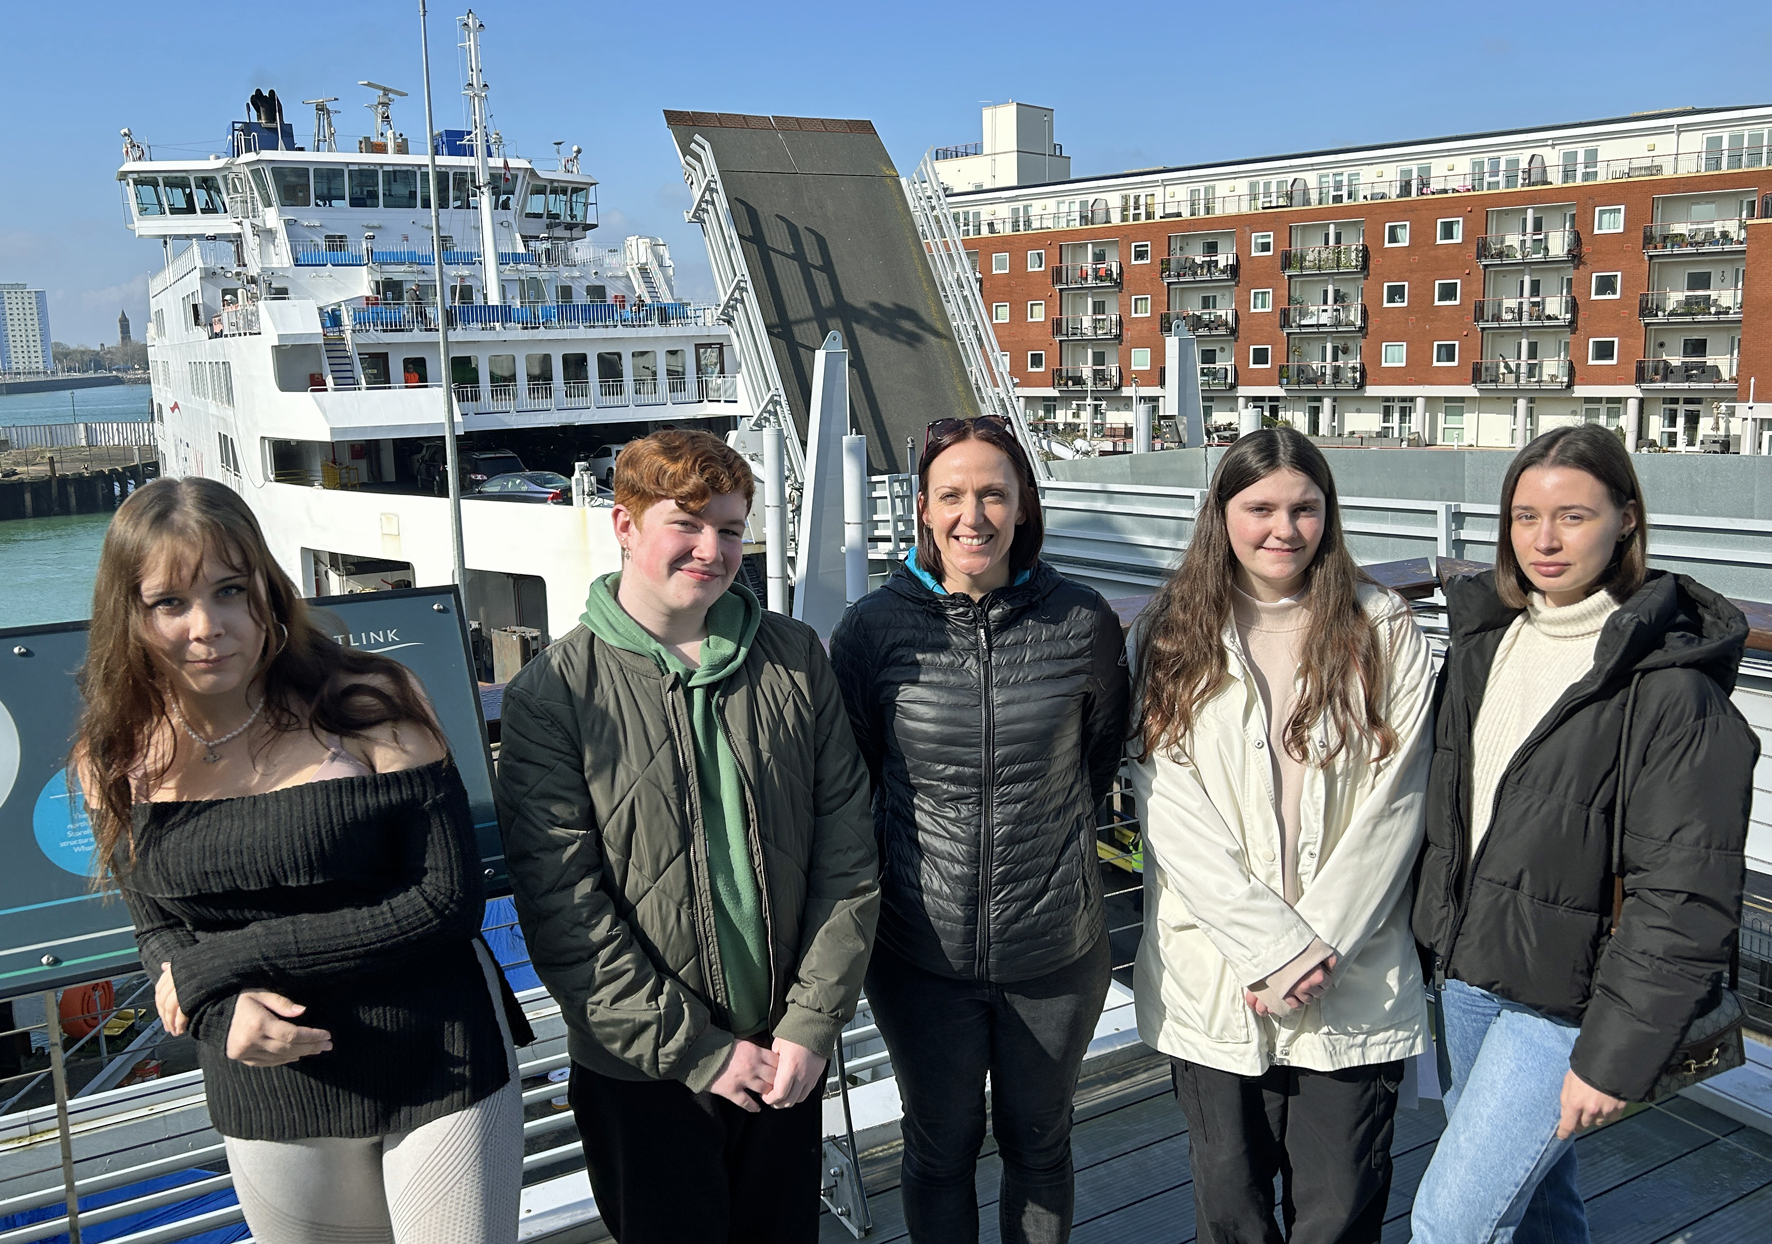 Four Travel and Tourism students and Isle of Wight College tutor Lindsay Davies at Wightlink in front of a ferry and linkspan